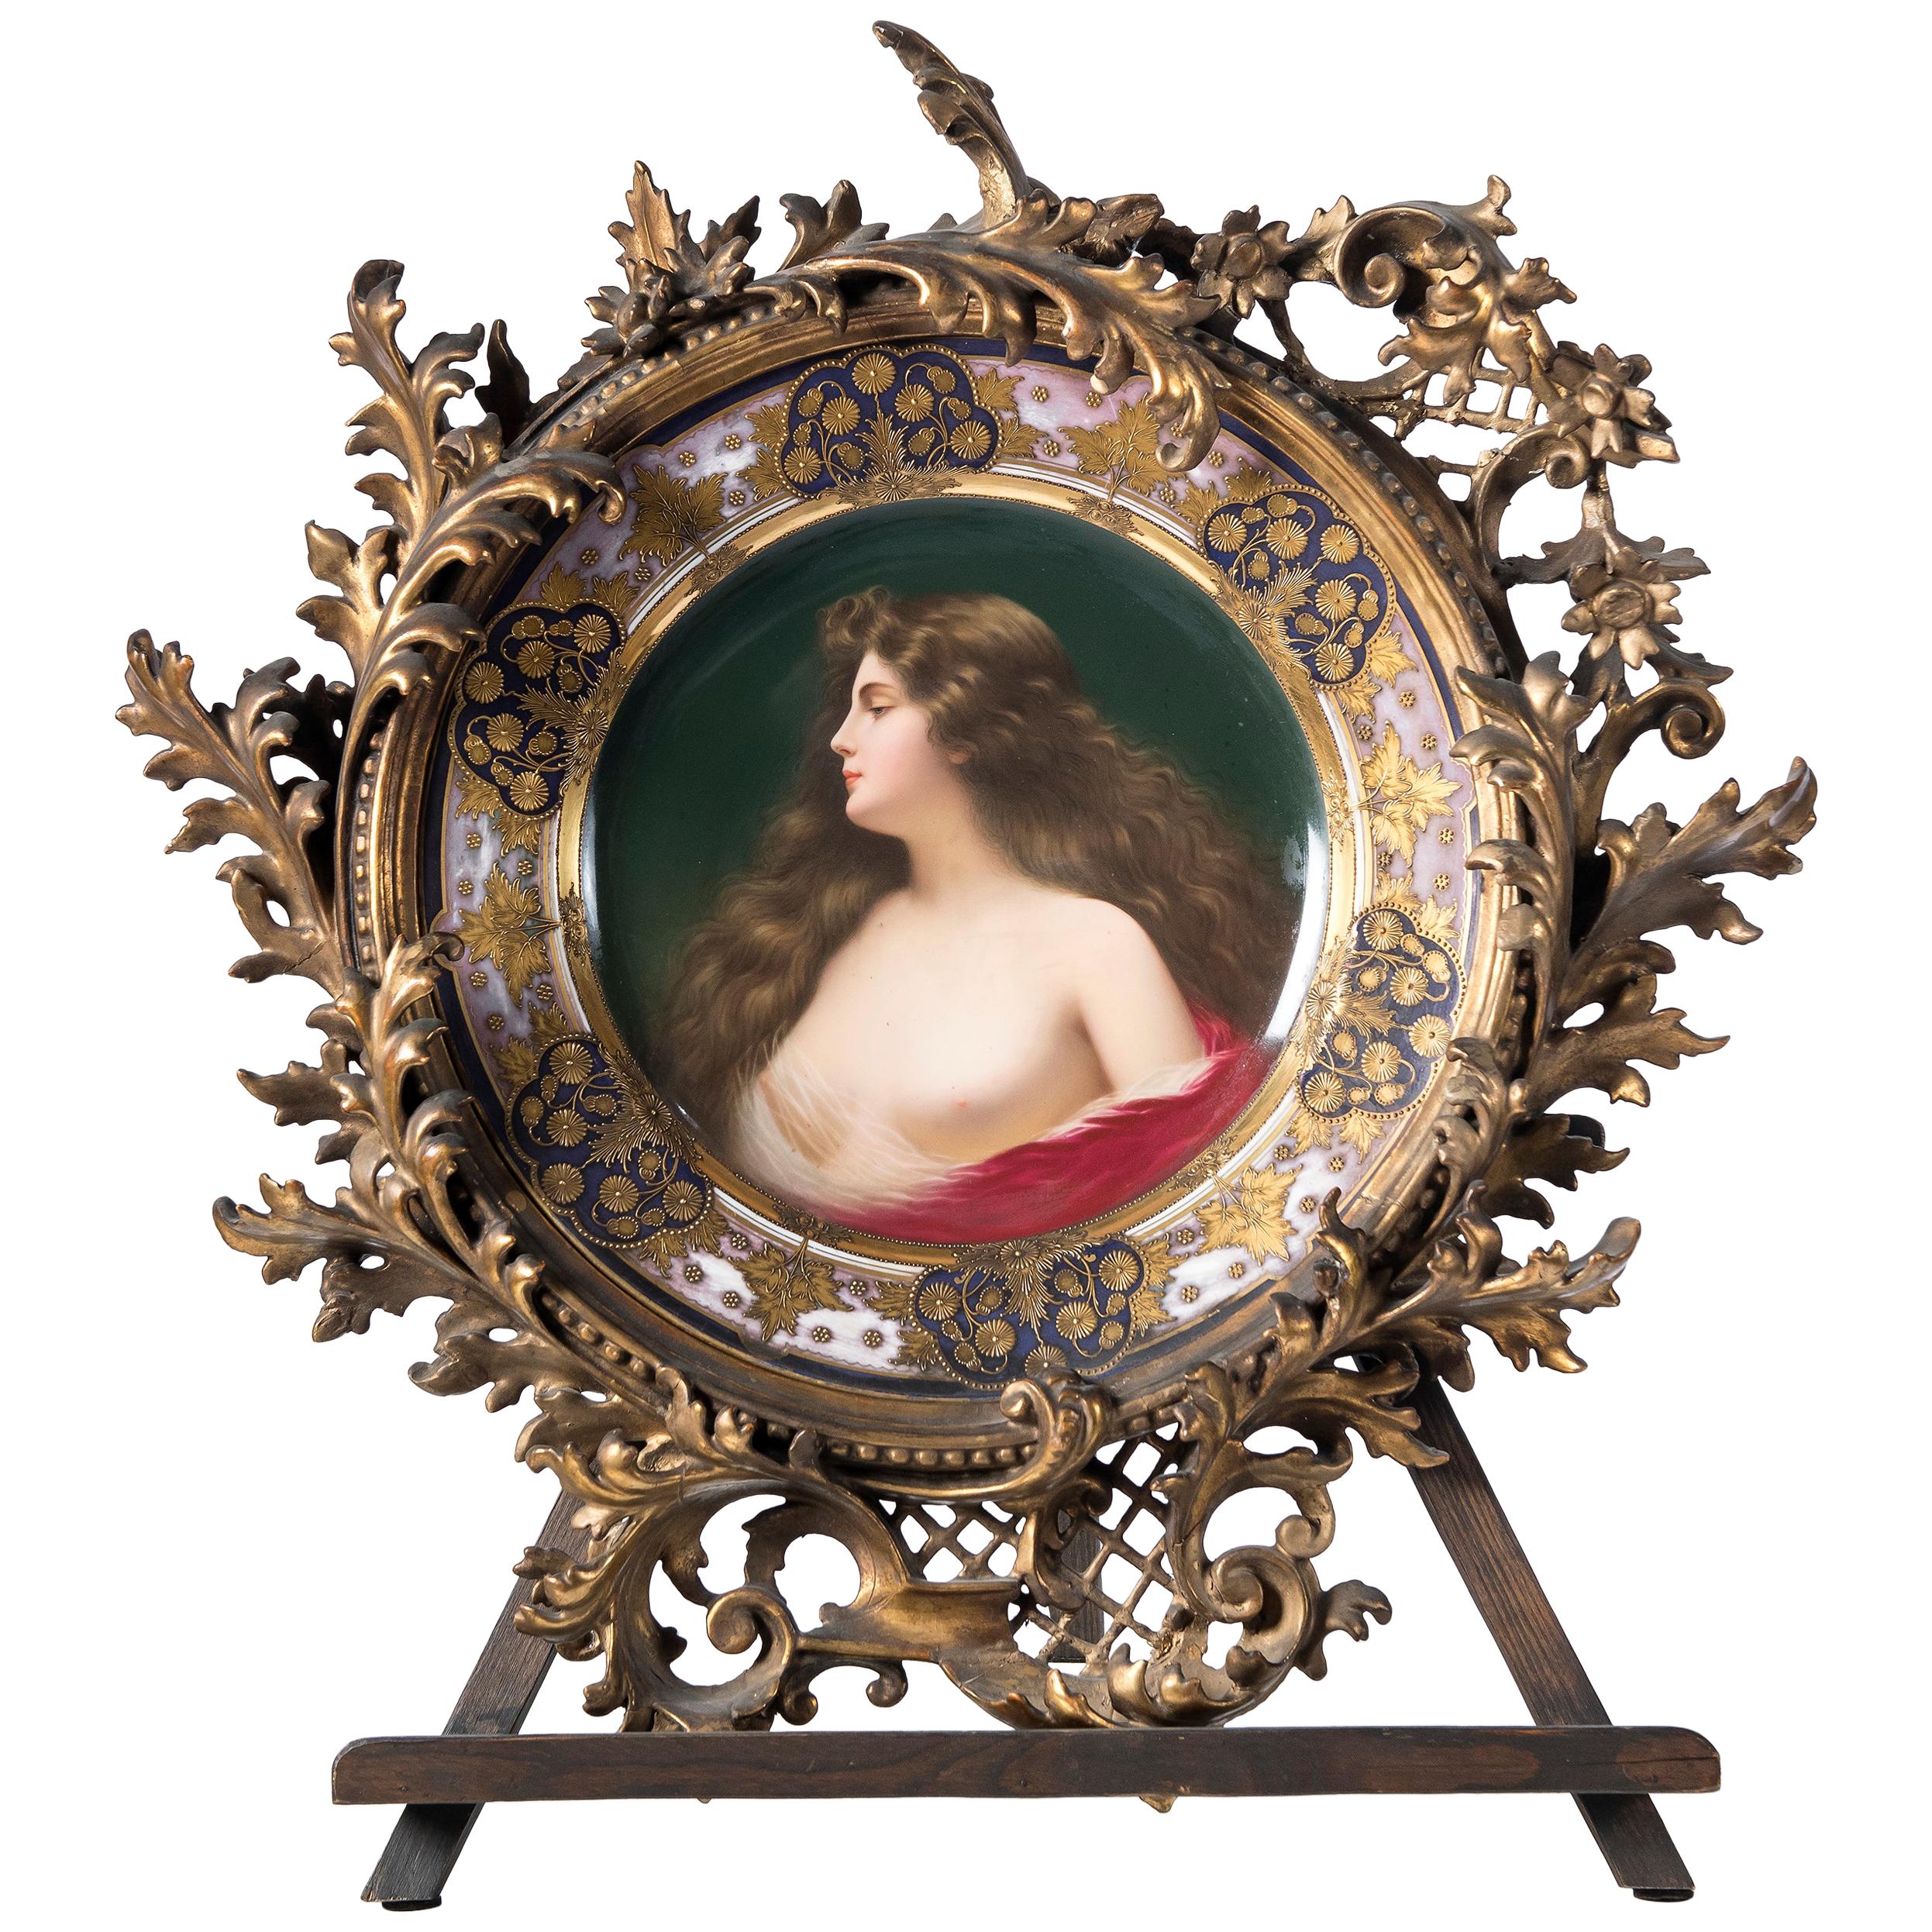 Painted Porcelain and Hand Carved, Gold Leaf Wood Frame, Signed "Épanouissement"